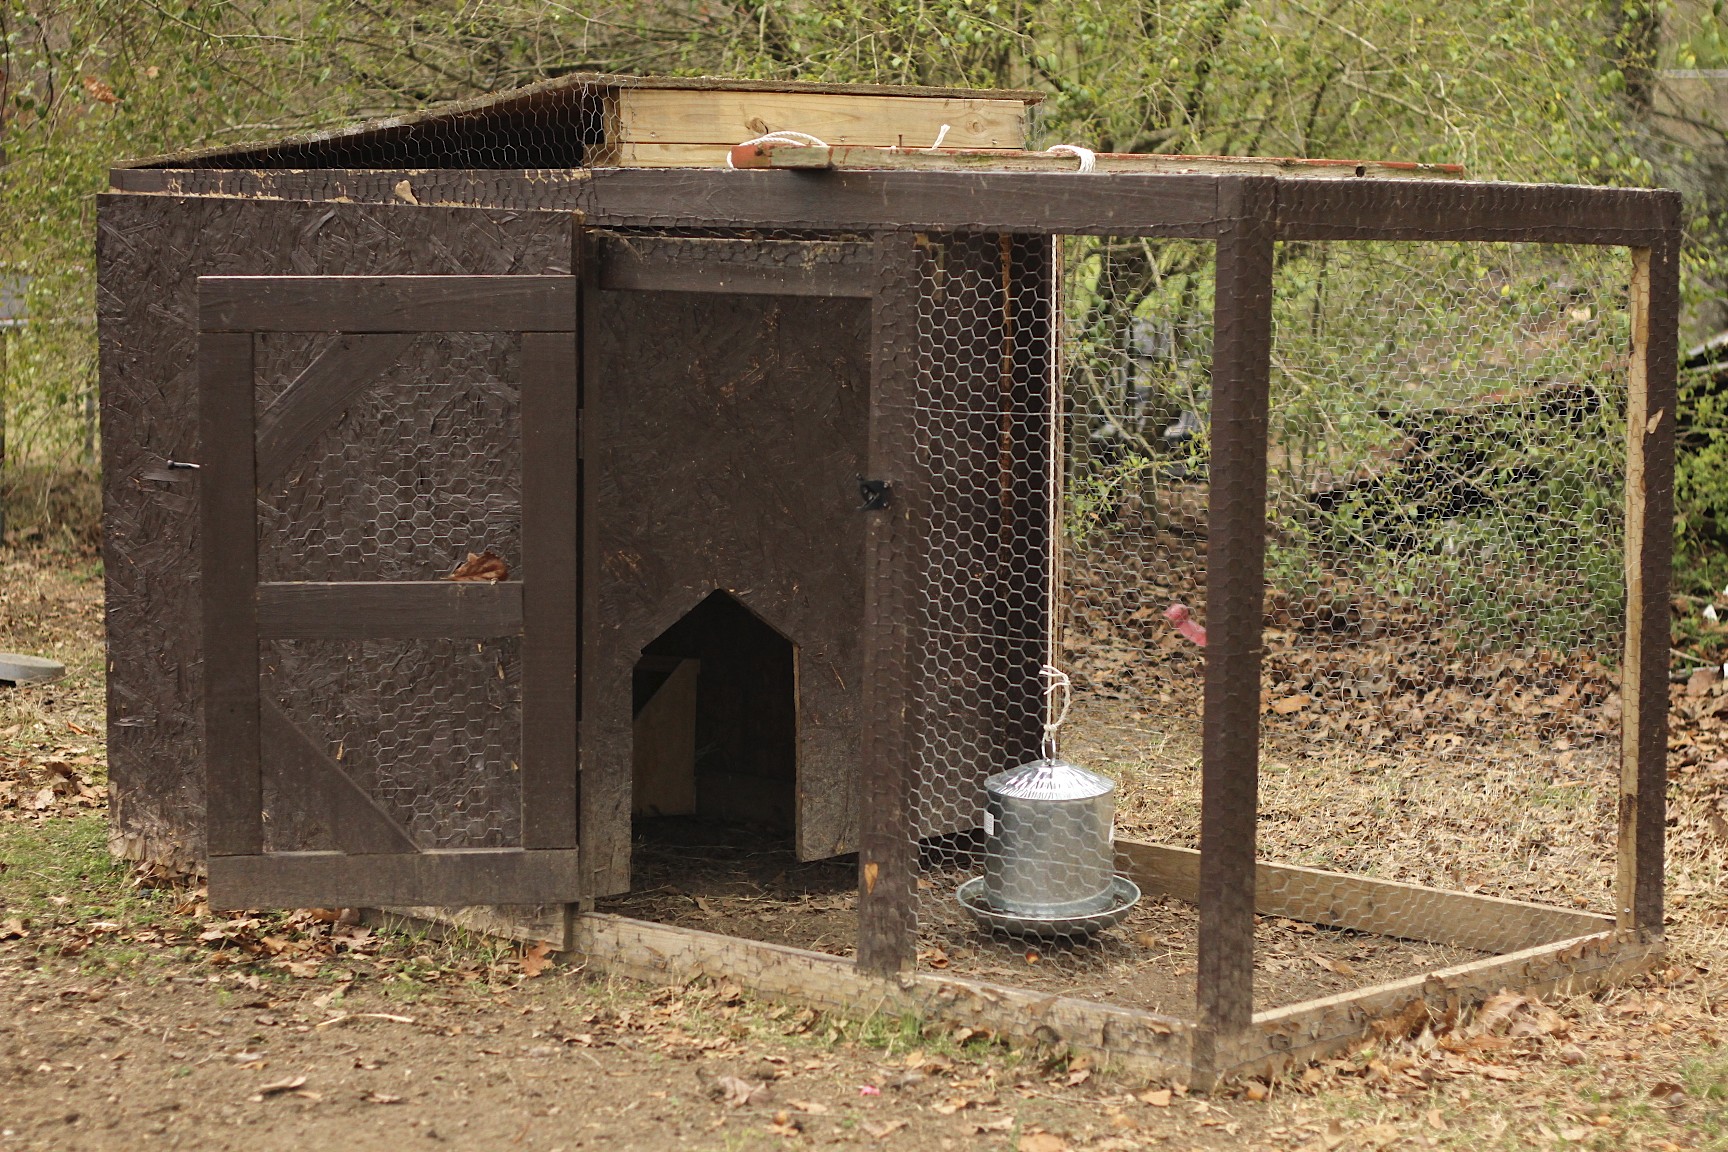 Chicken Coop, based on a brooder design here at BYC.